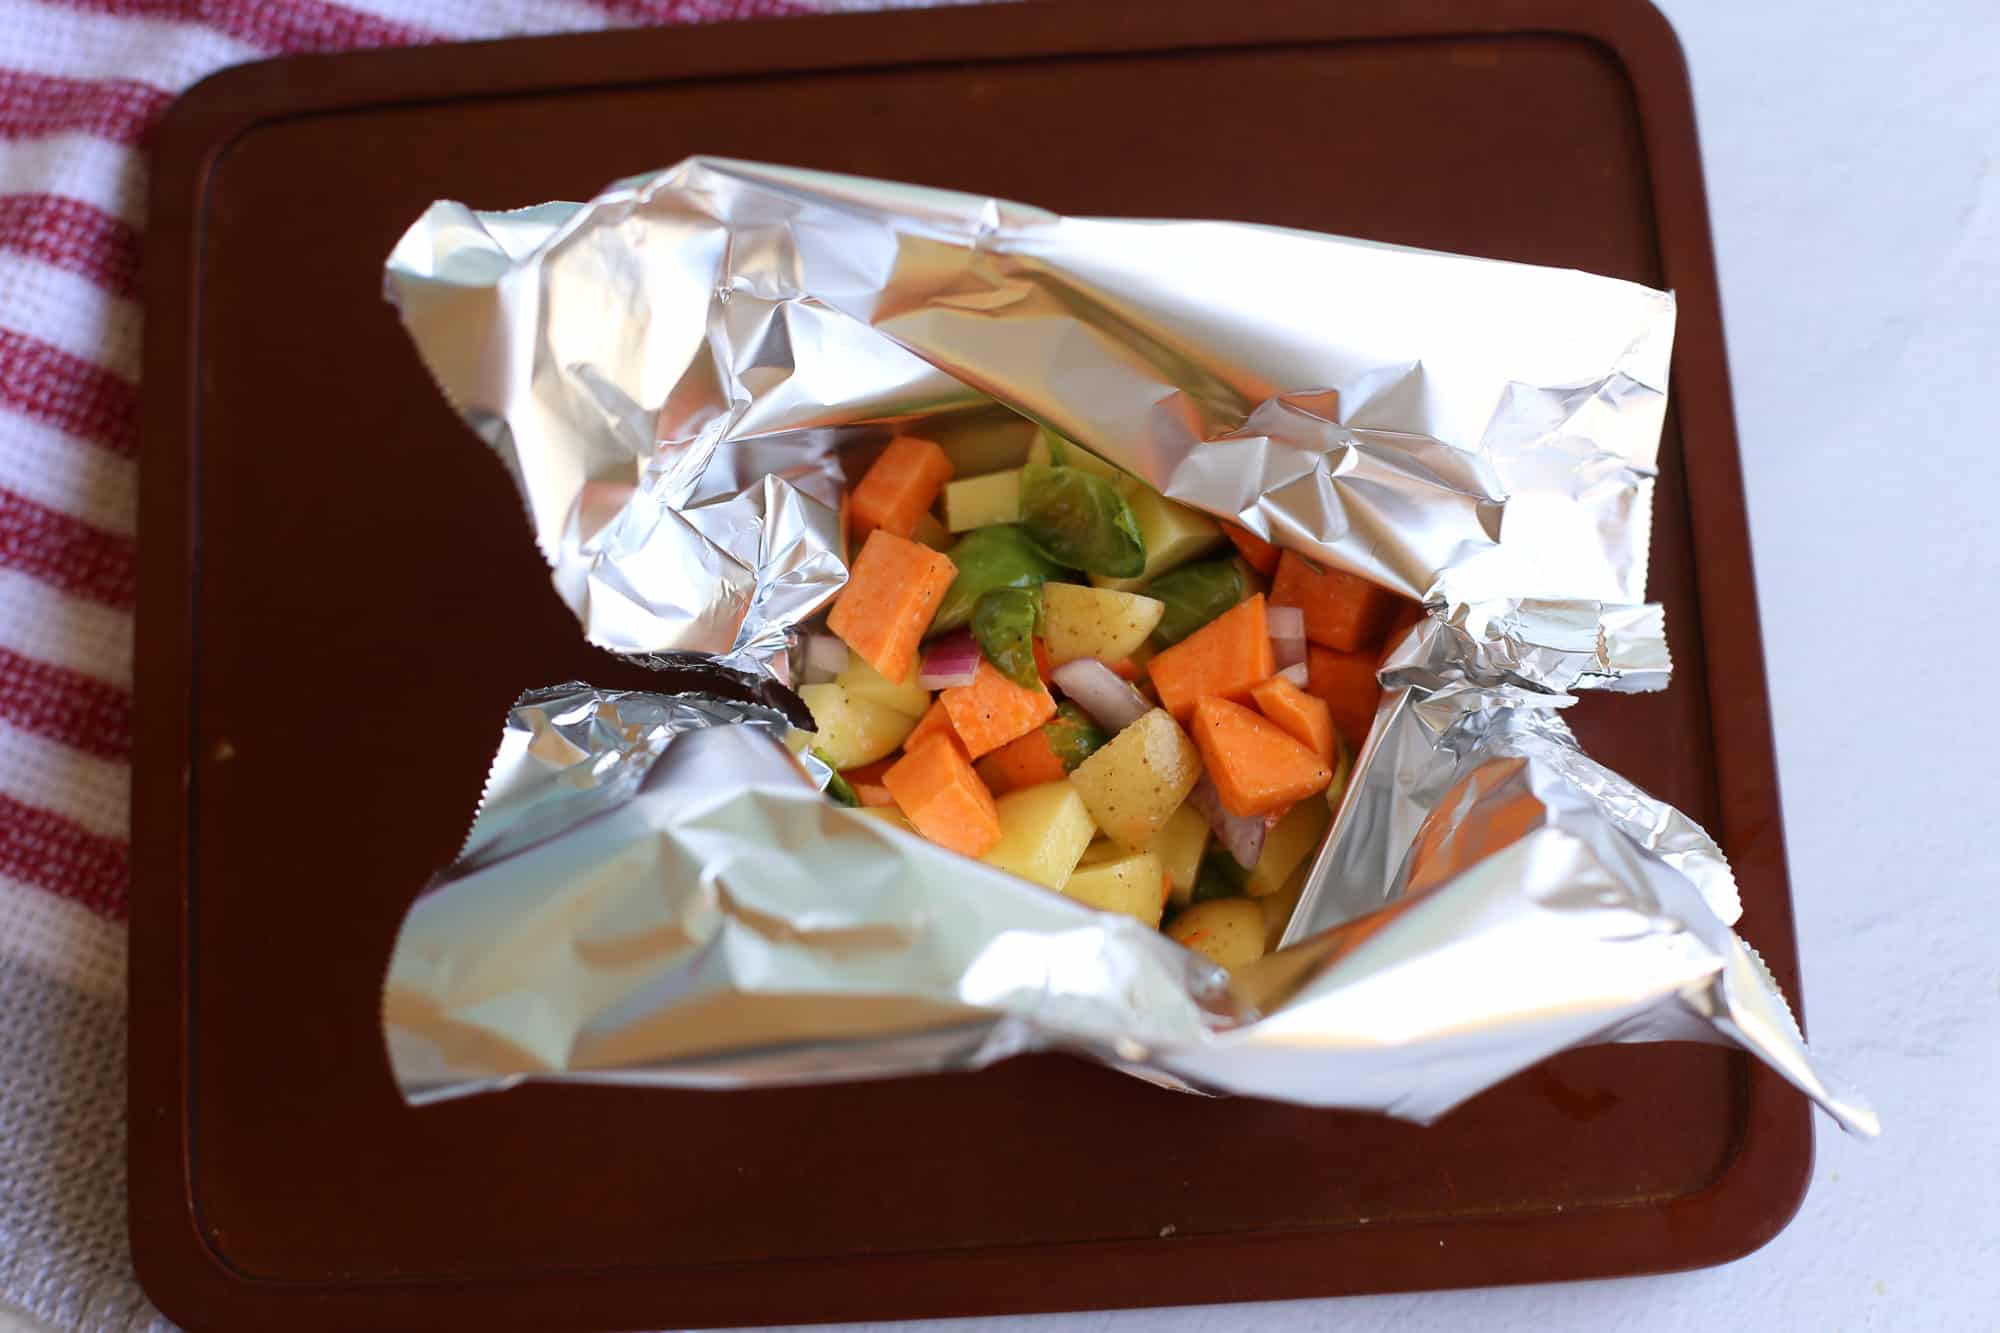 Wrapping vegetables in foil to cook on the grill.